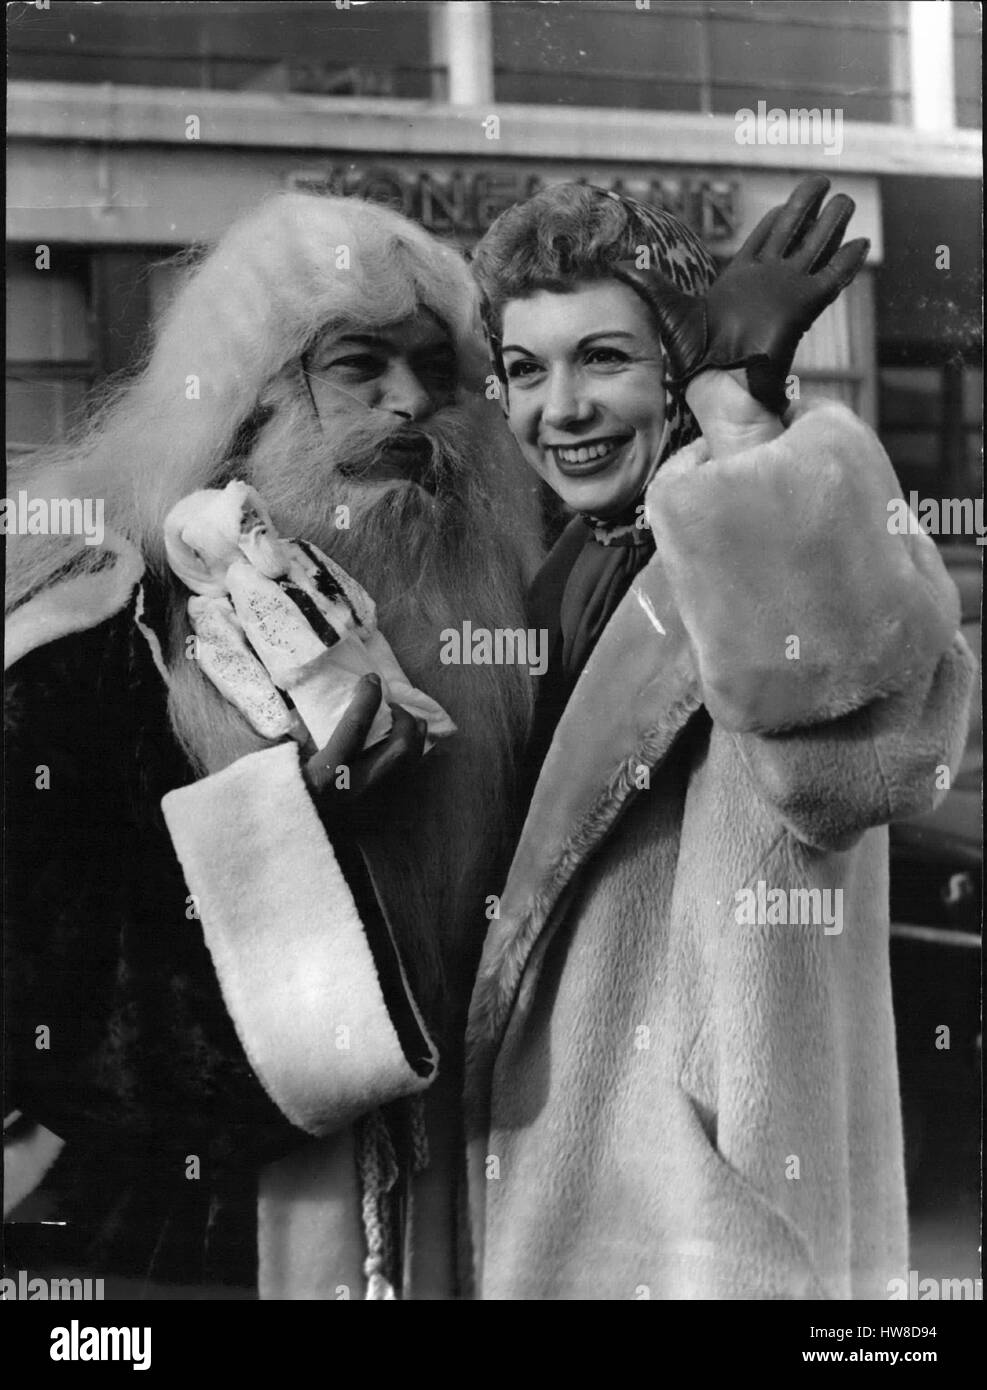 Dec. 12, 1958 - Father Christmas welcomes french star : The Famous French singer, Jacqueline Francois, arrived from New-york in Paris To -day. The French singer Henri Salvador Dressed in ''Father Christmas'' welcomed her at the airport. photo shows Henri Salvador and Jacqueline Francois photographed at the Bourget. (Credit Image: © Keystone Press Agency/Keystone USA via ZUMAPRESS.com) Stock Photo